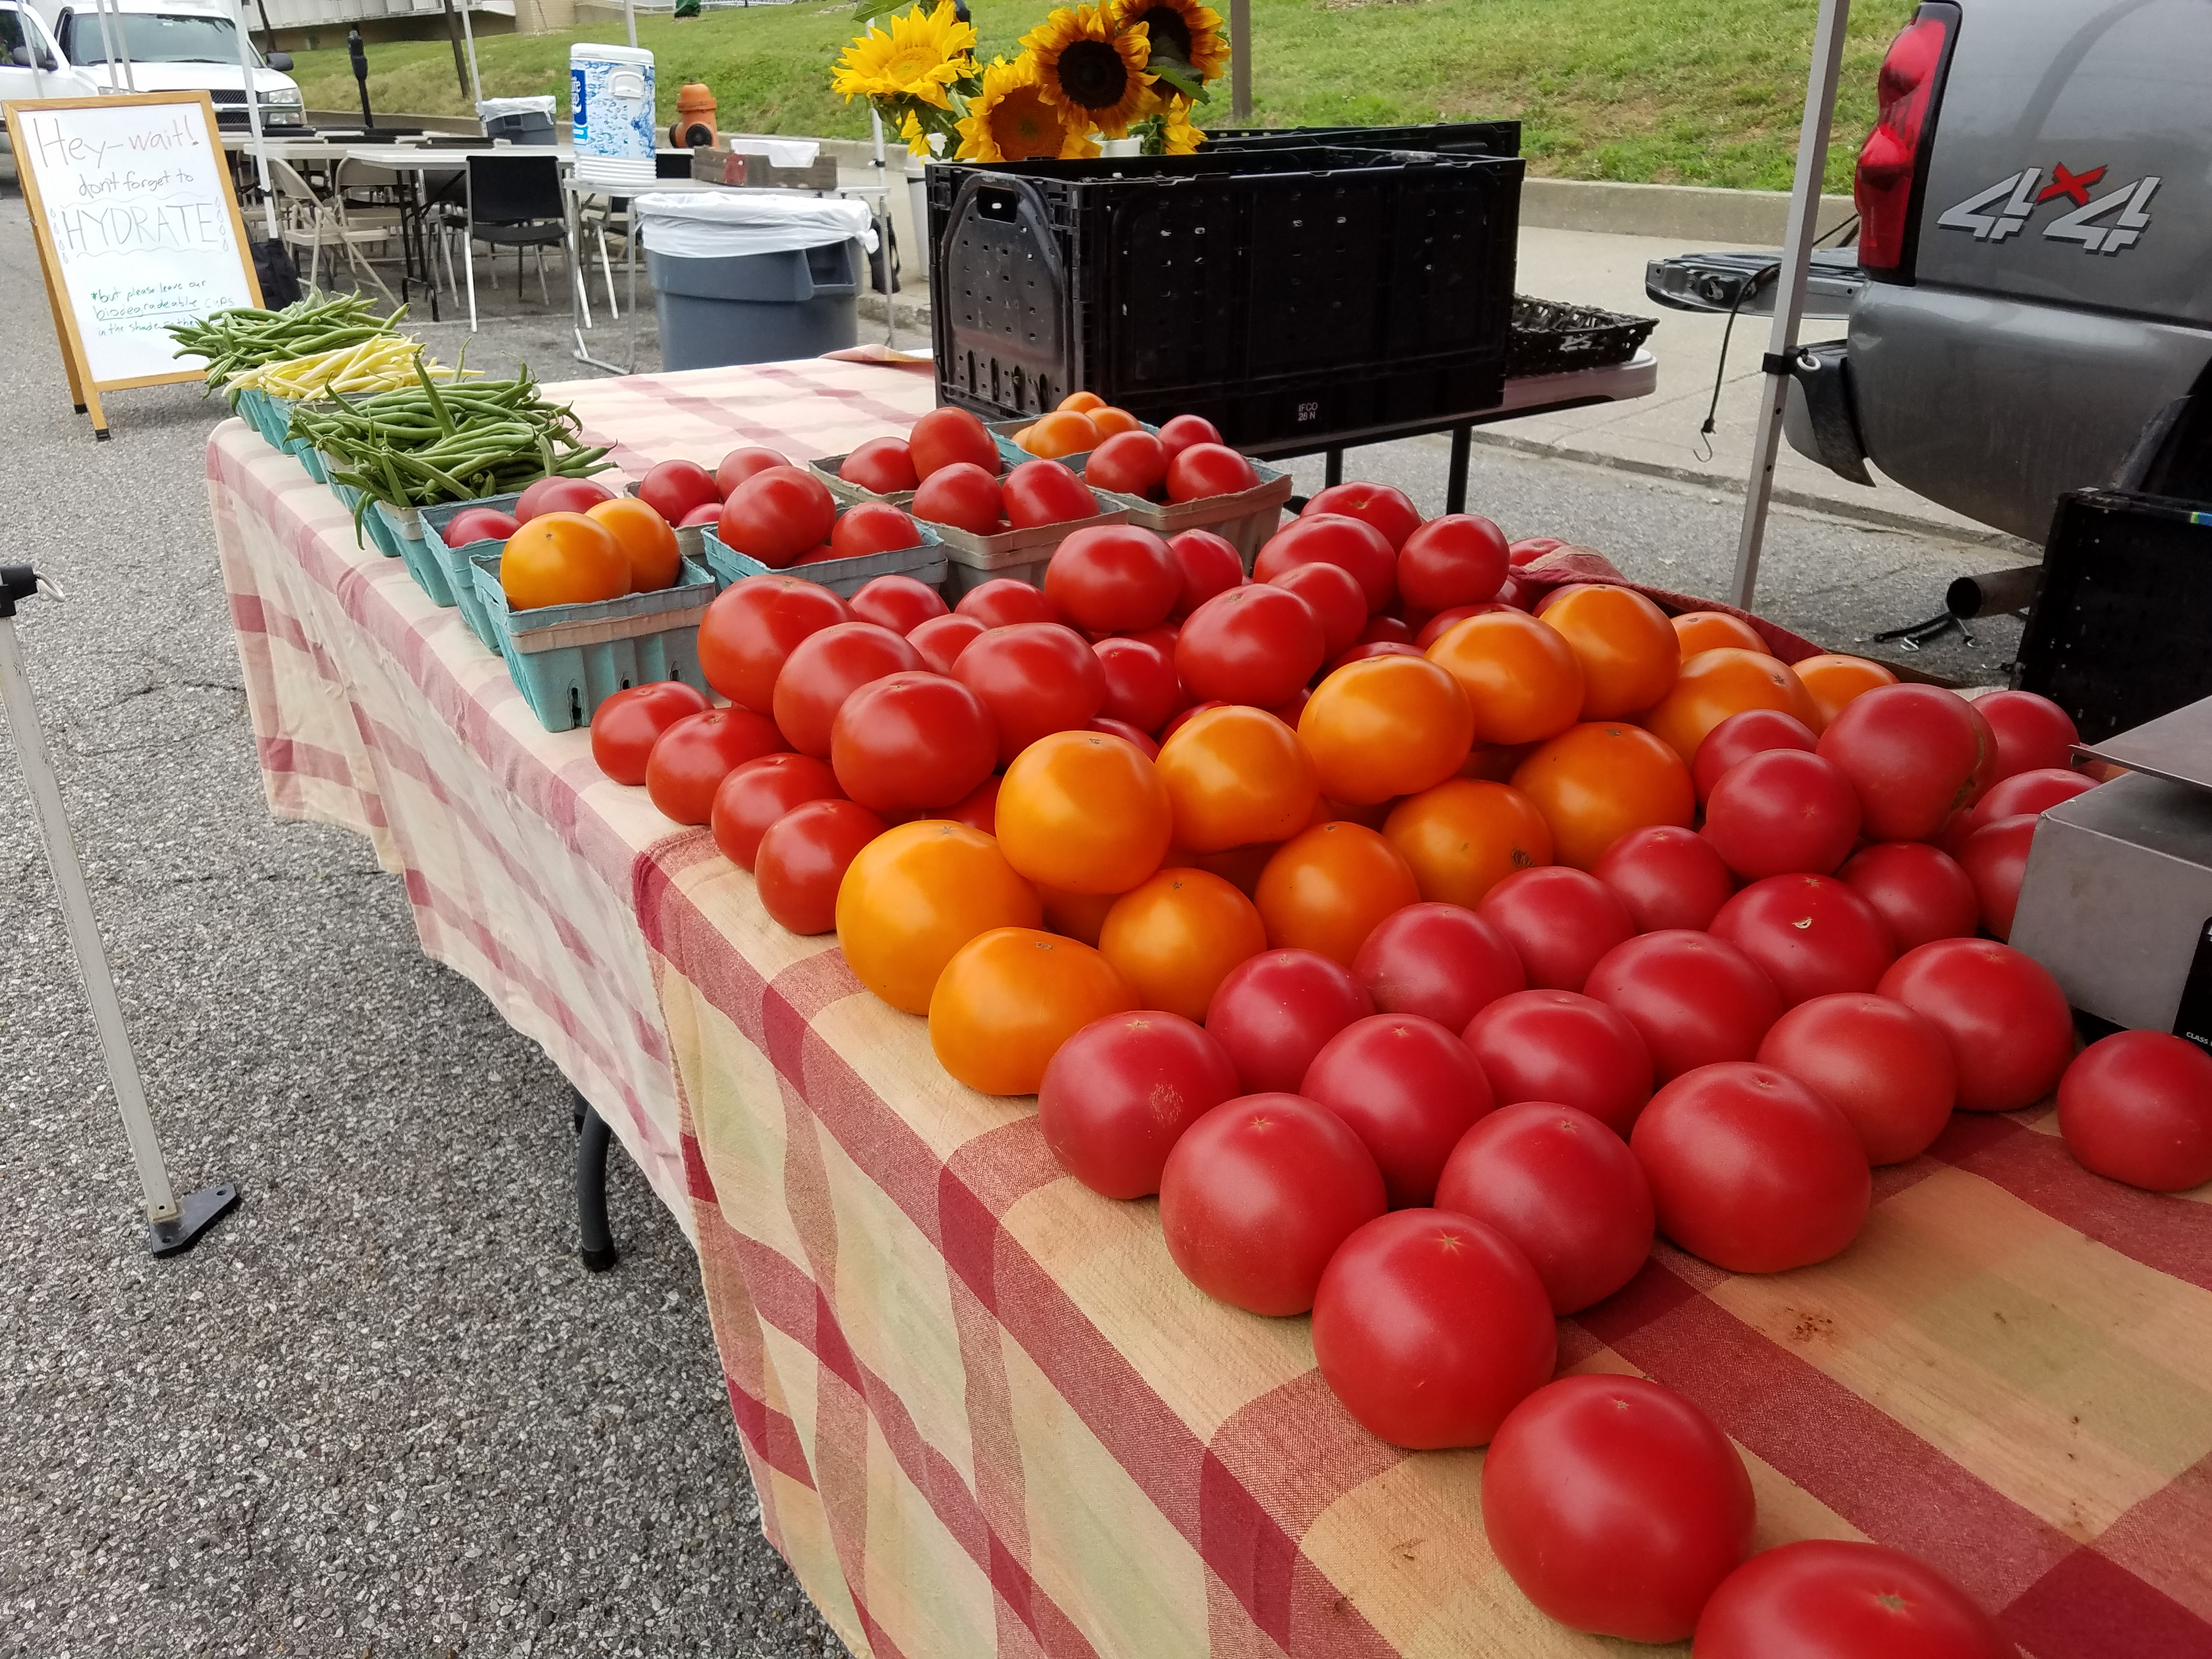 Gray Street Farmers Market Launches Crowdfunding Campaign to Benefit SNAP Recipients